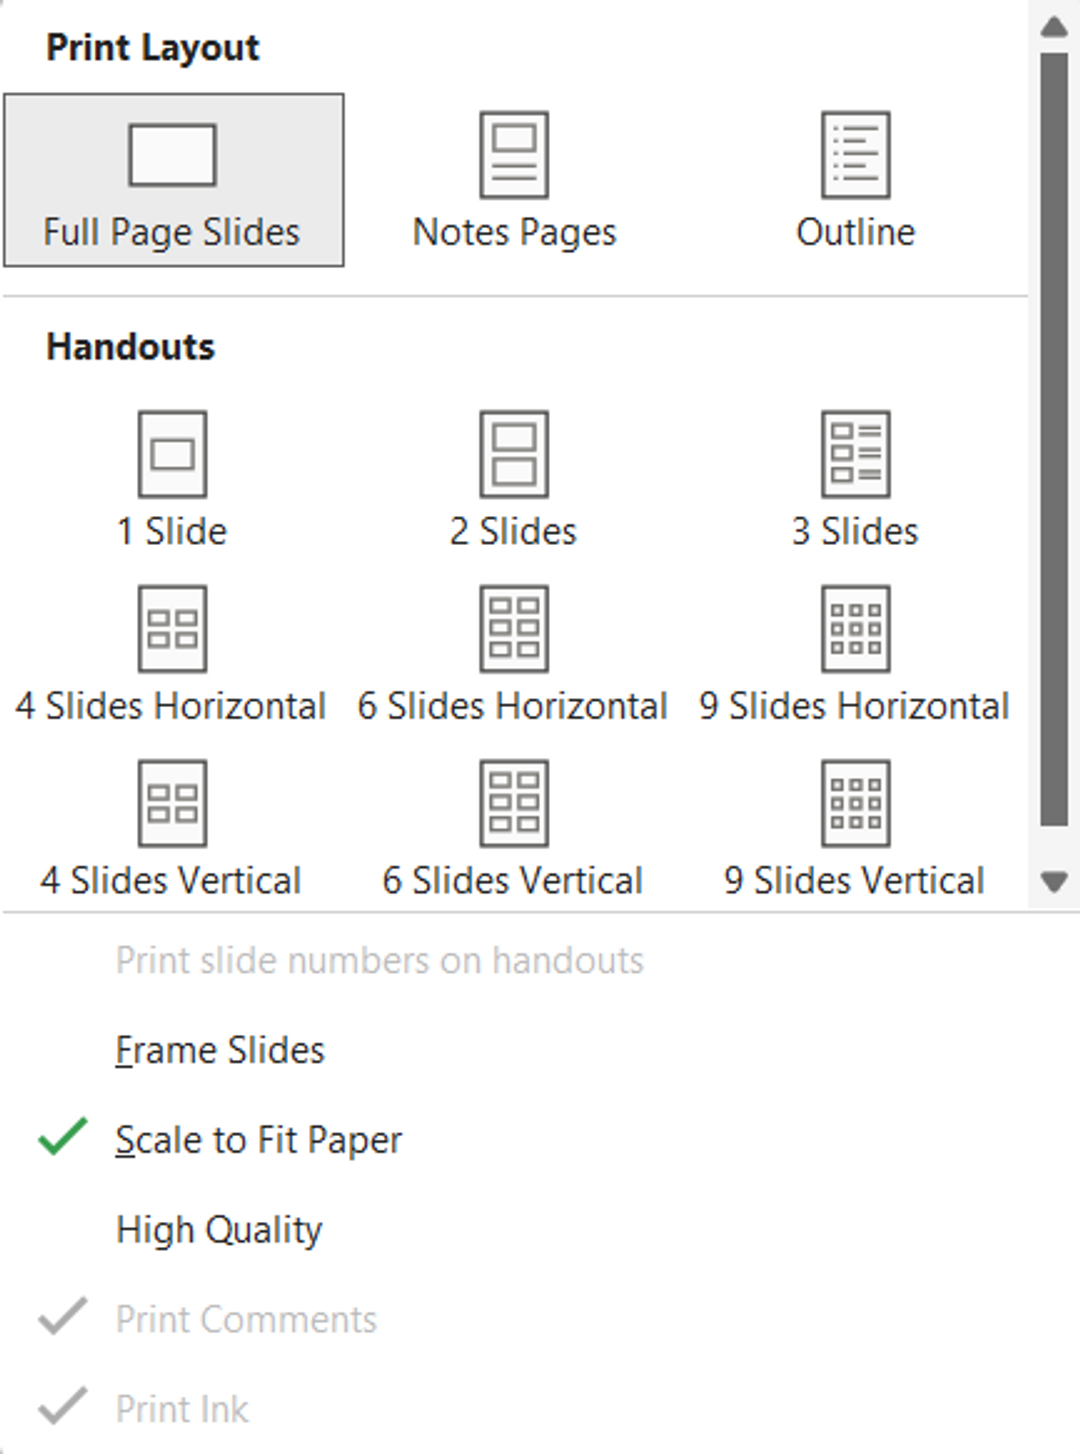 Print layout options for printing PowerPoint slides